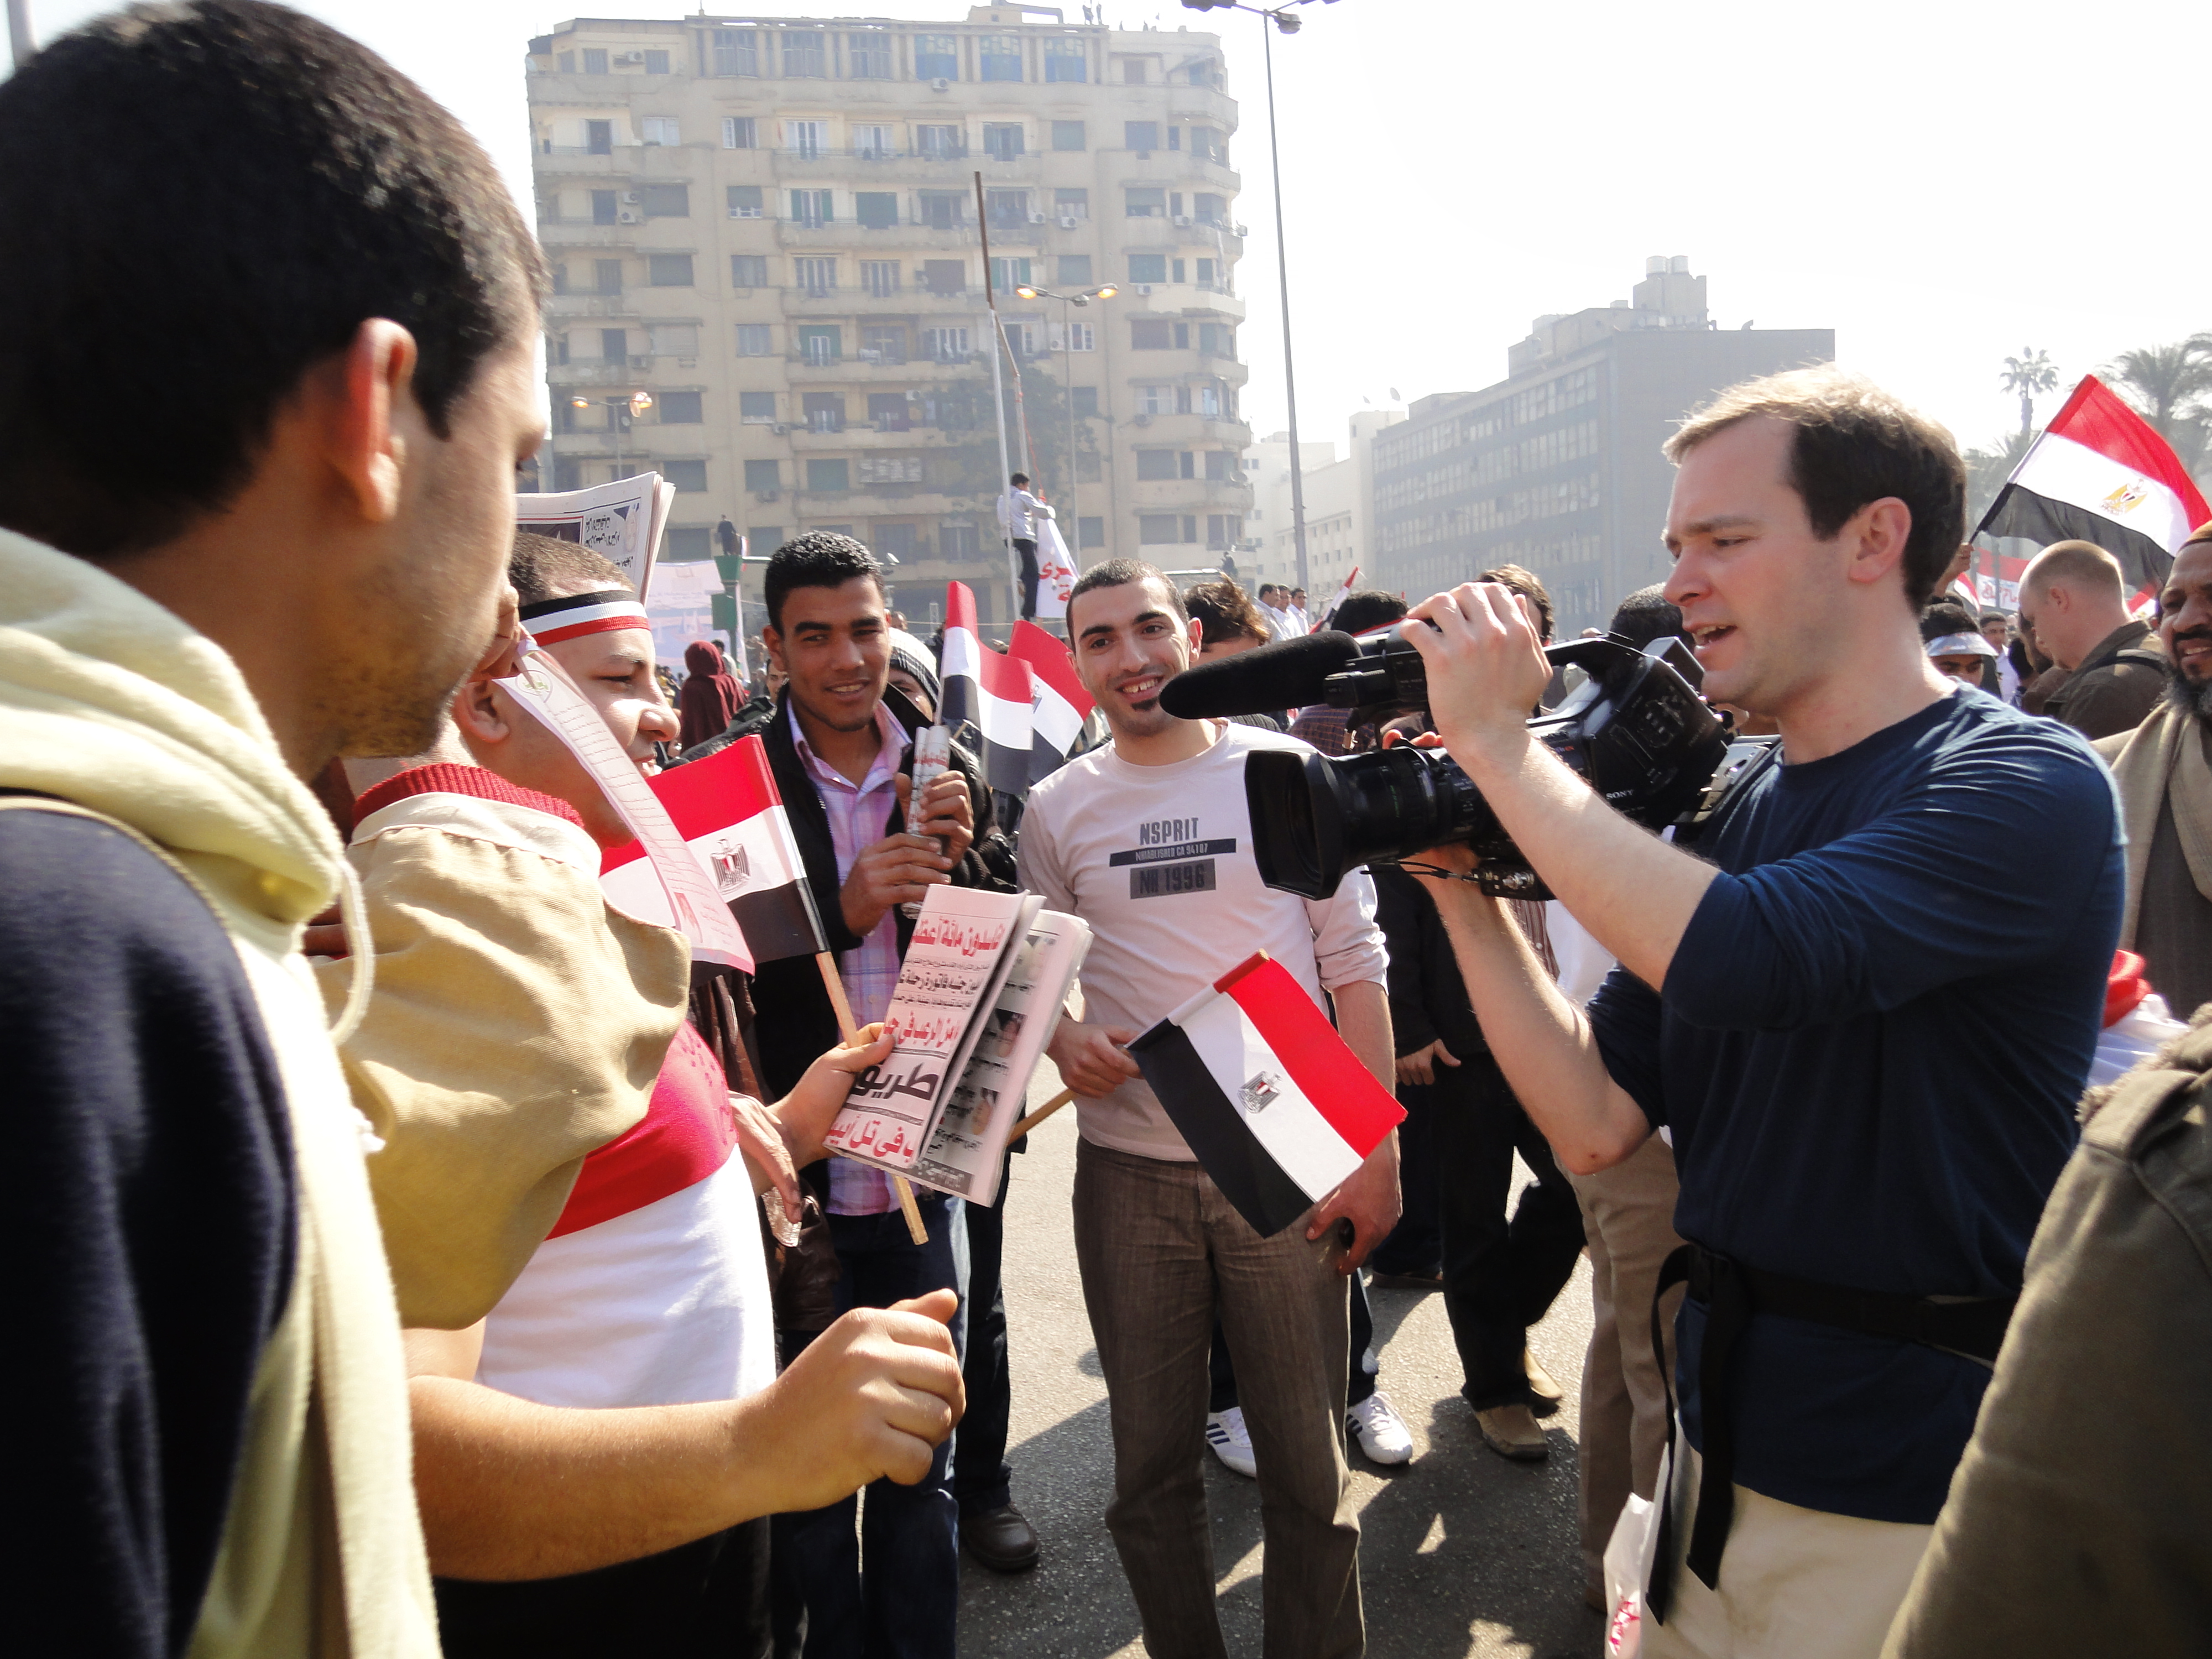 Director/Cinematographer Matthew O'Neill filming in Tahrir Square, Egypt. February 2011